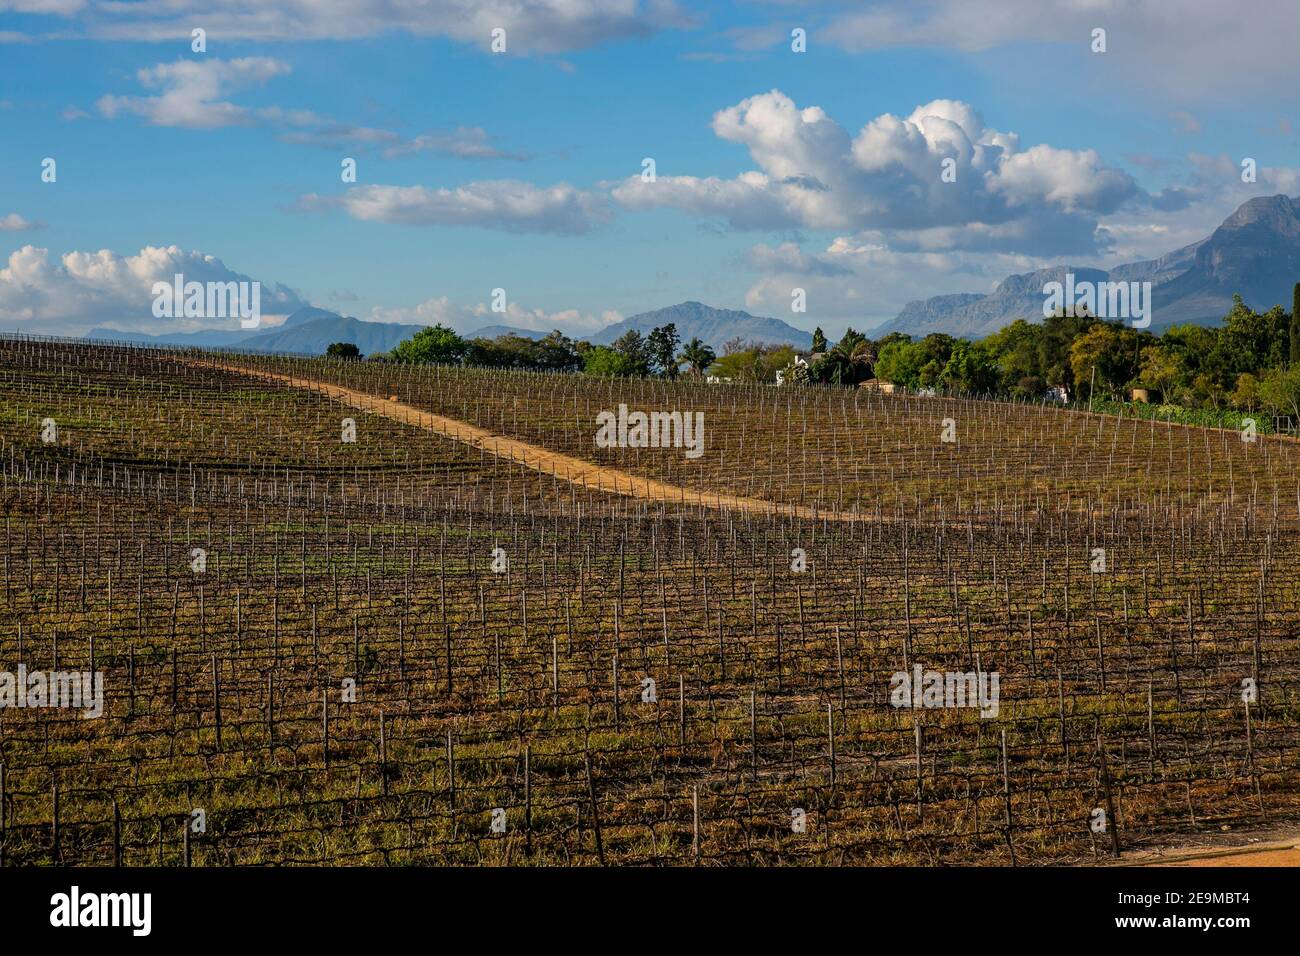 Vineyards in Stollenbosch of Western Cape Province, South Africa Stock Photo